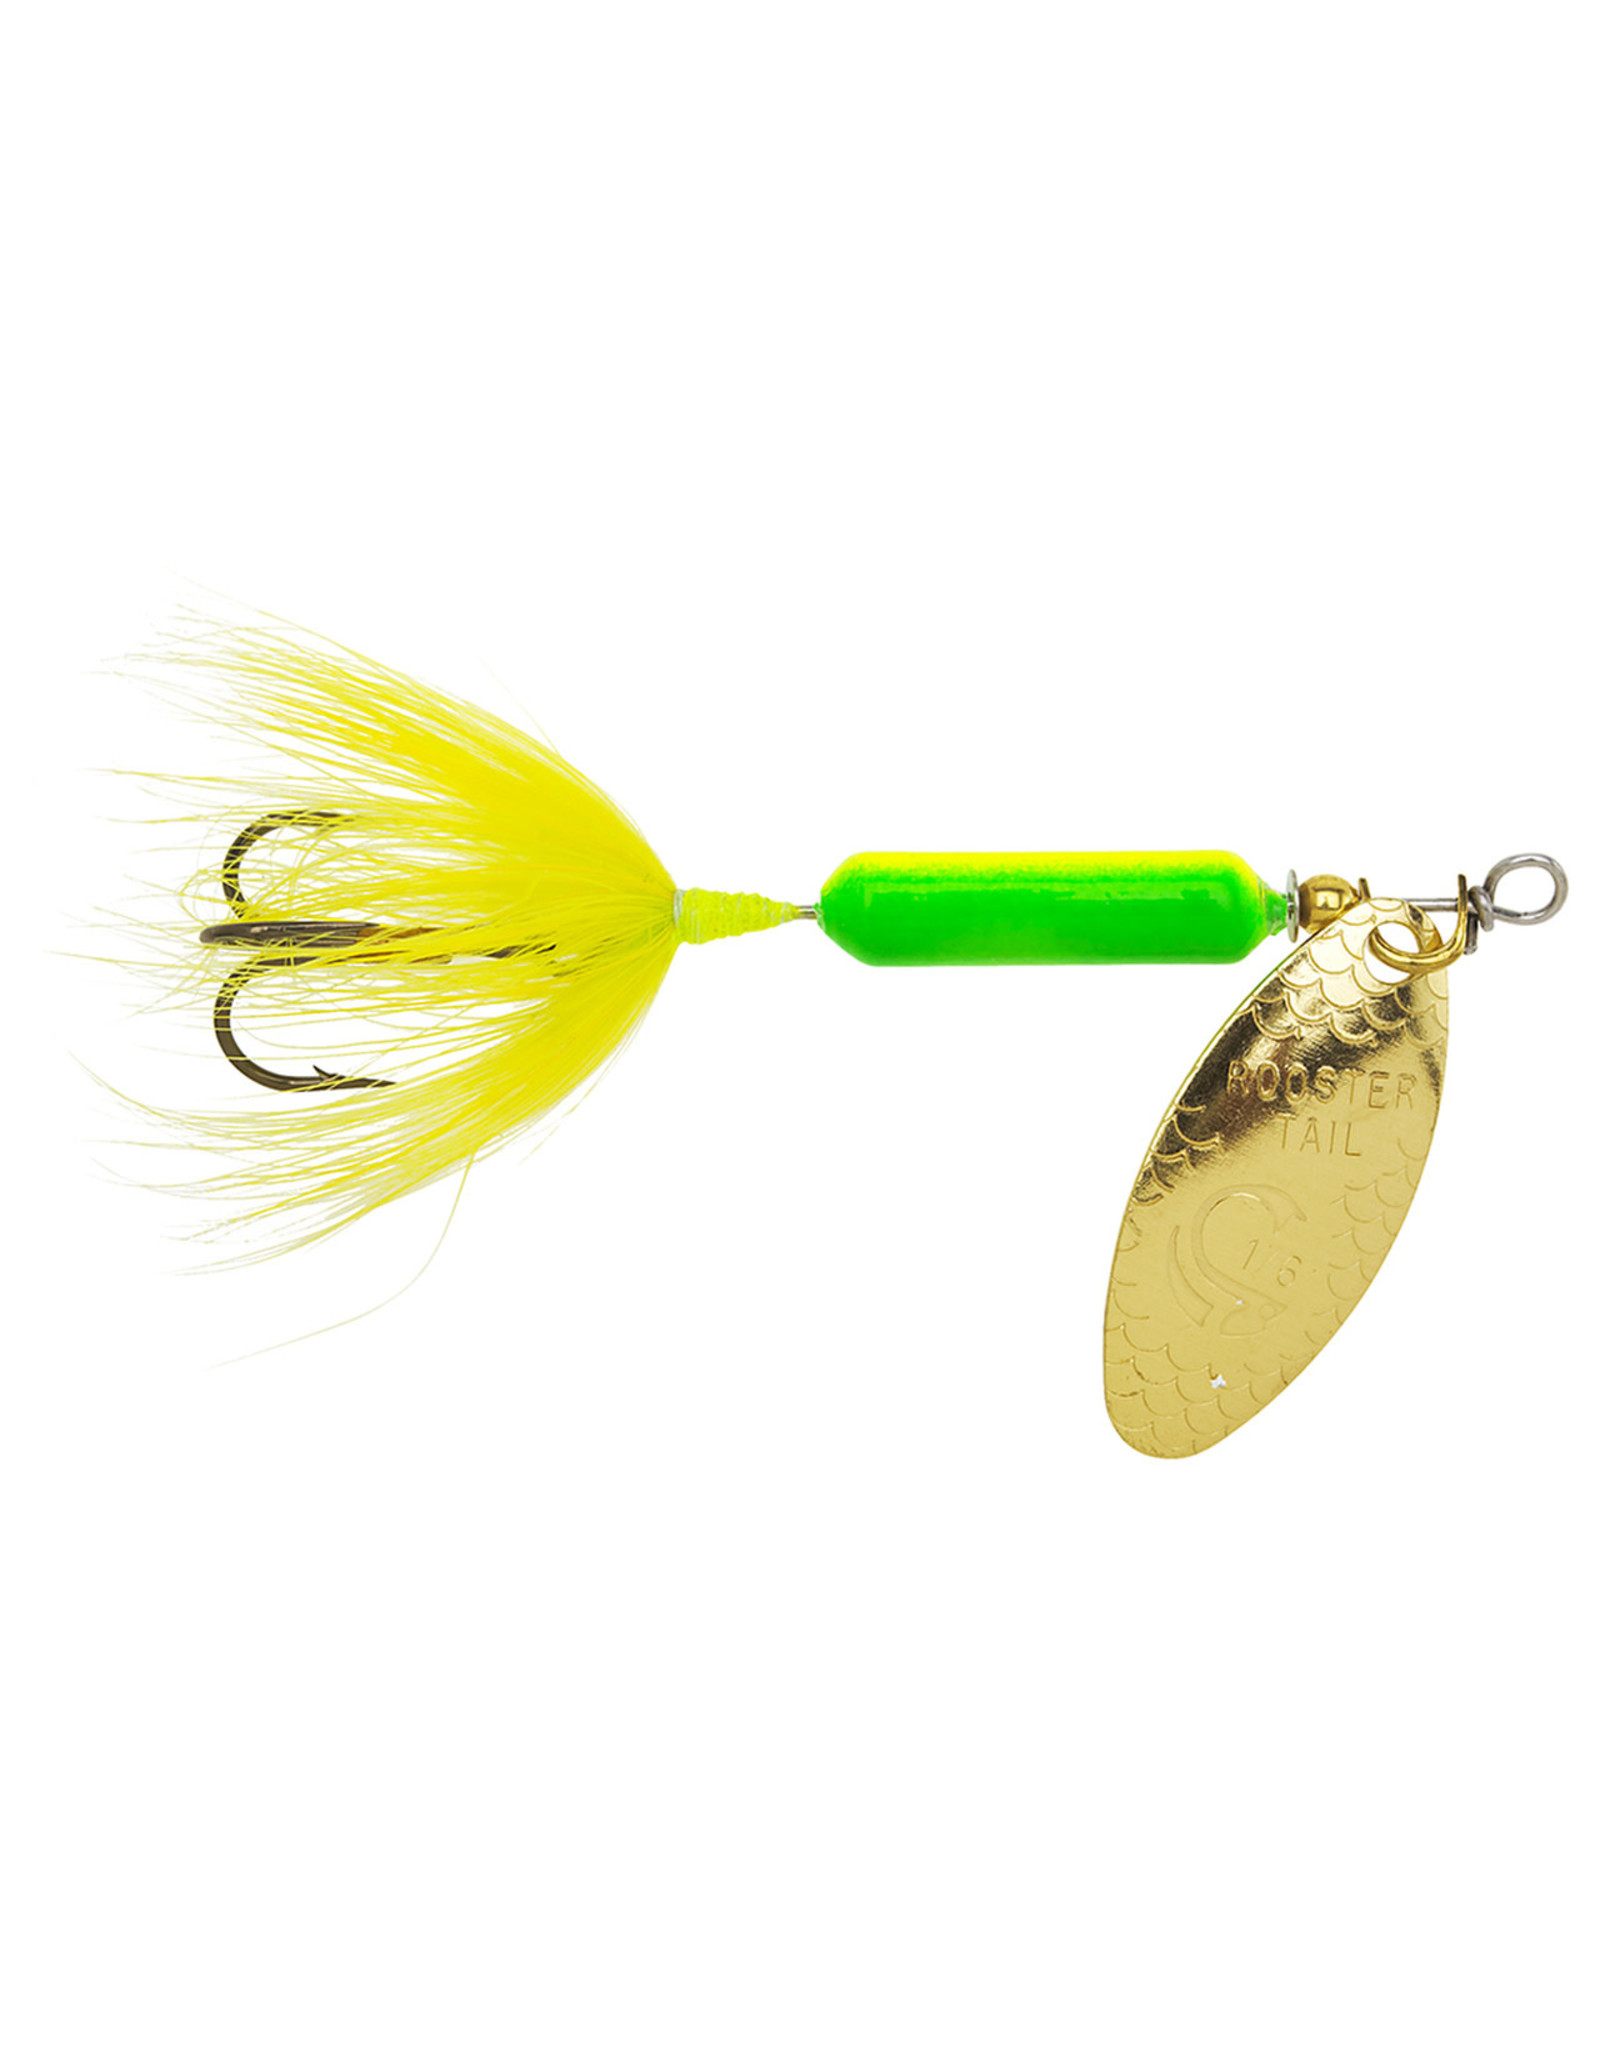 Wordens Rooster Tail - 2-1/4" 1/8 Oz - Lime Chartreuse